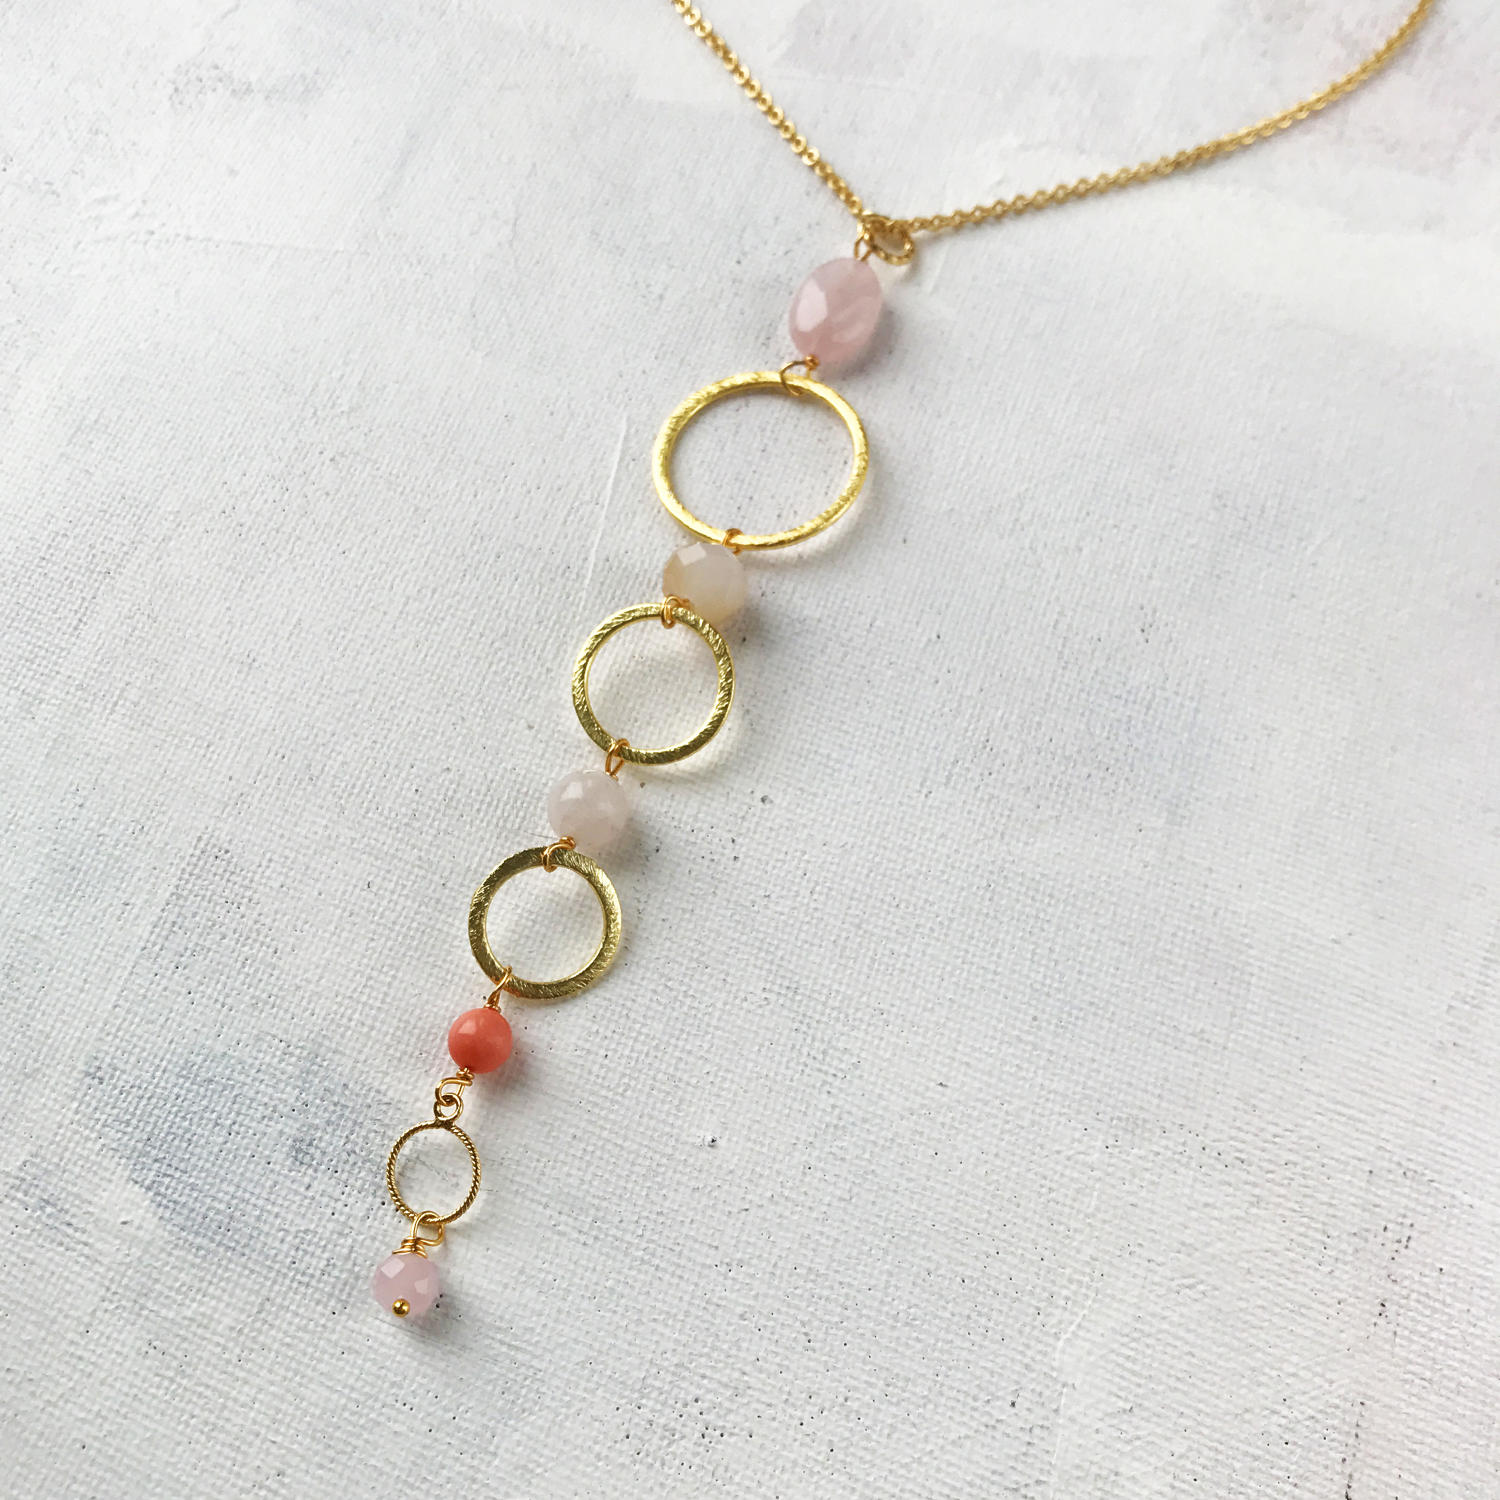 Delicate long pendant pink/coral